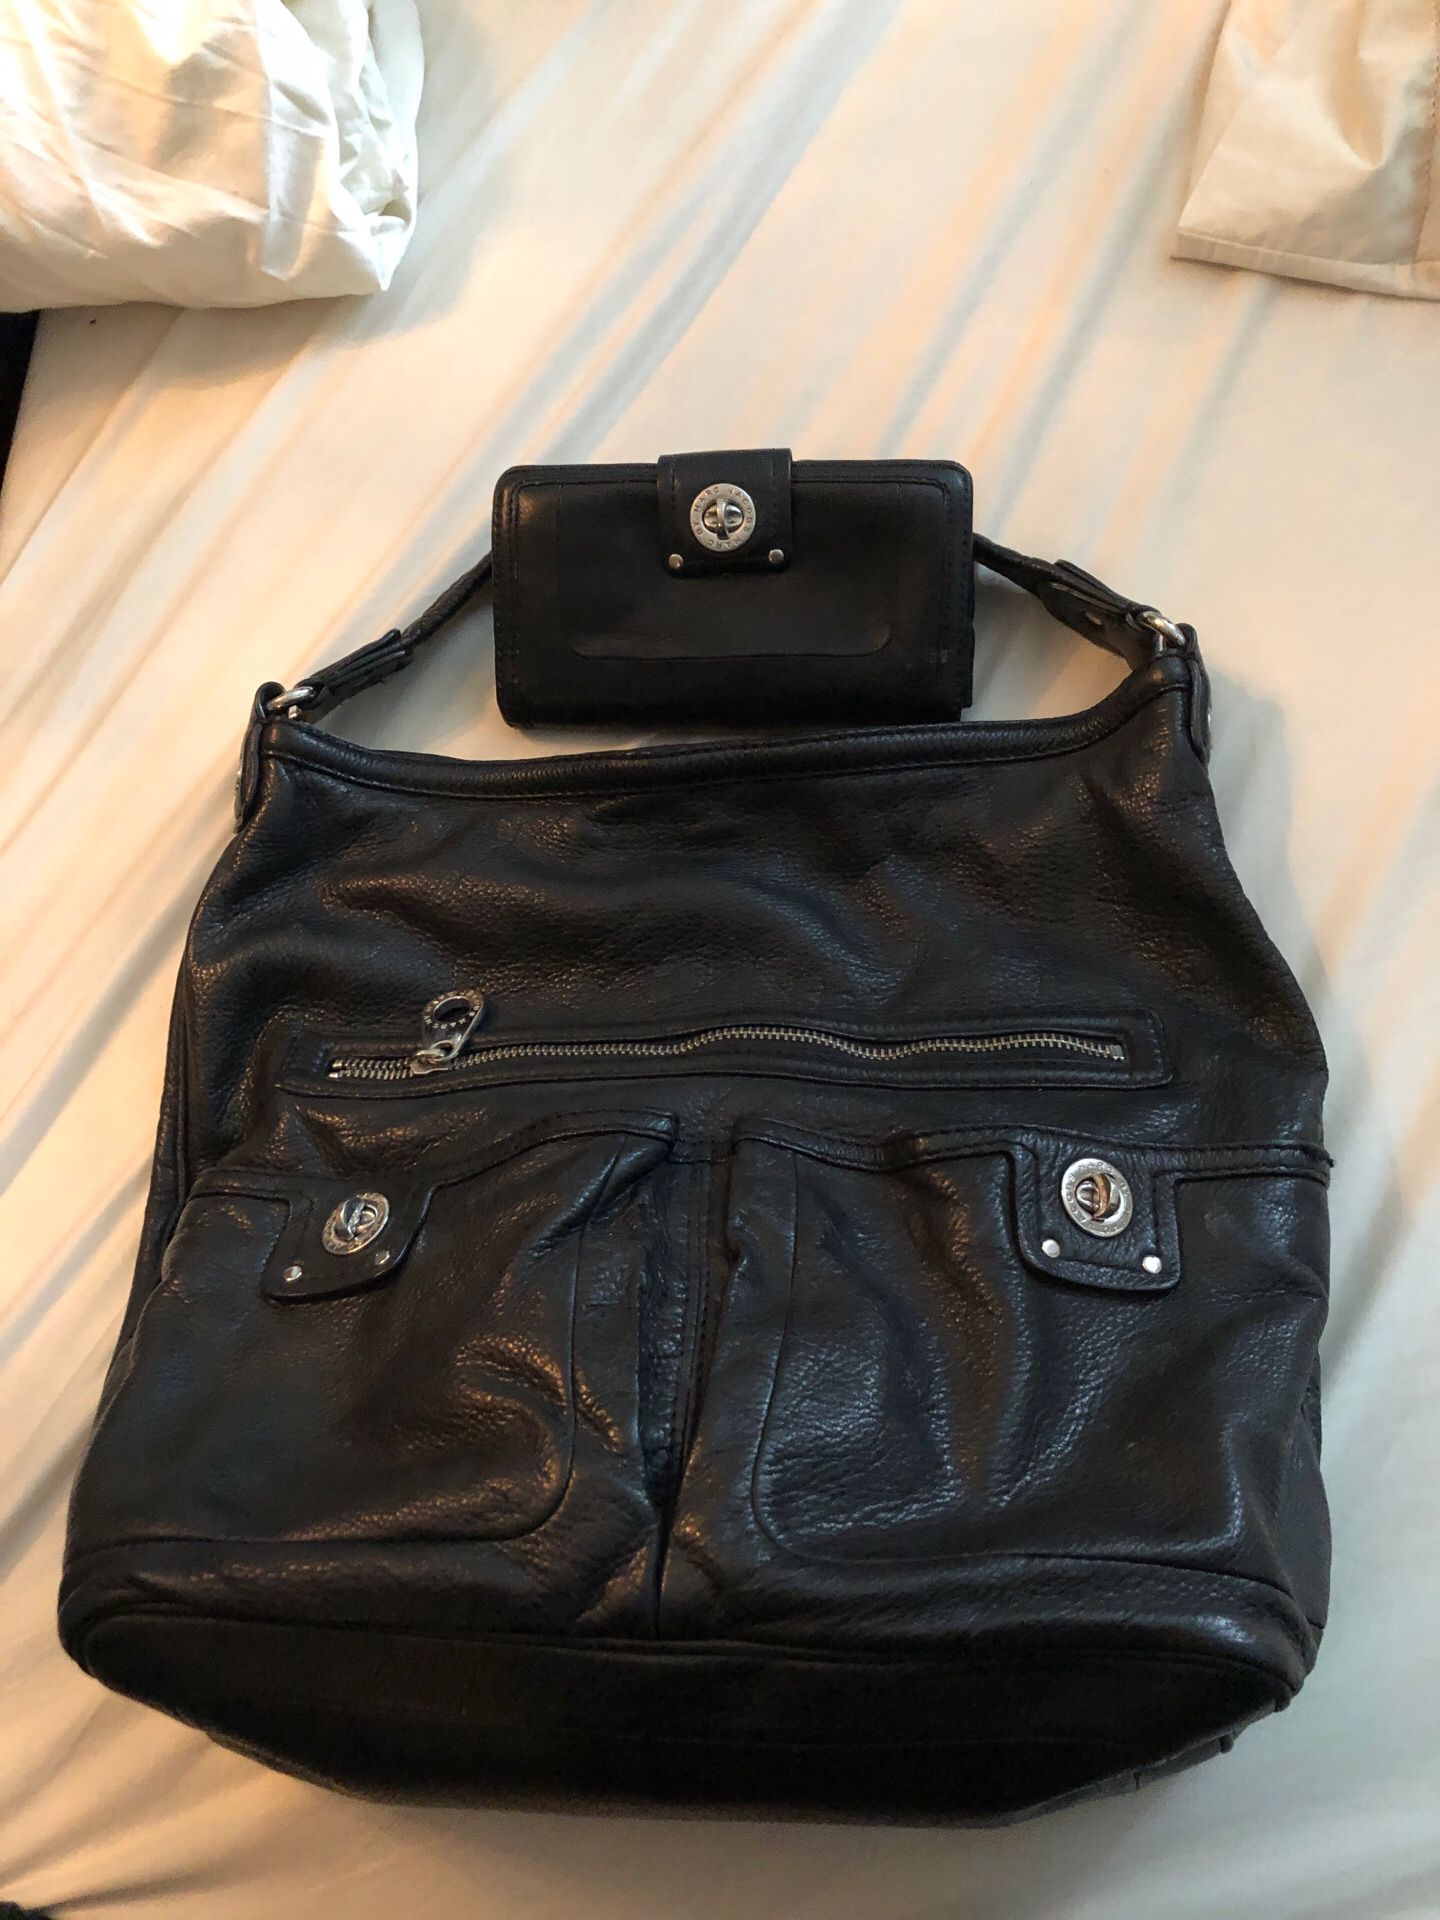 Marc Jacobs Purse and Wallet